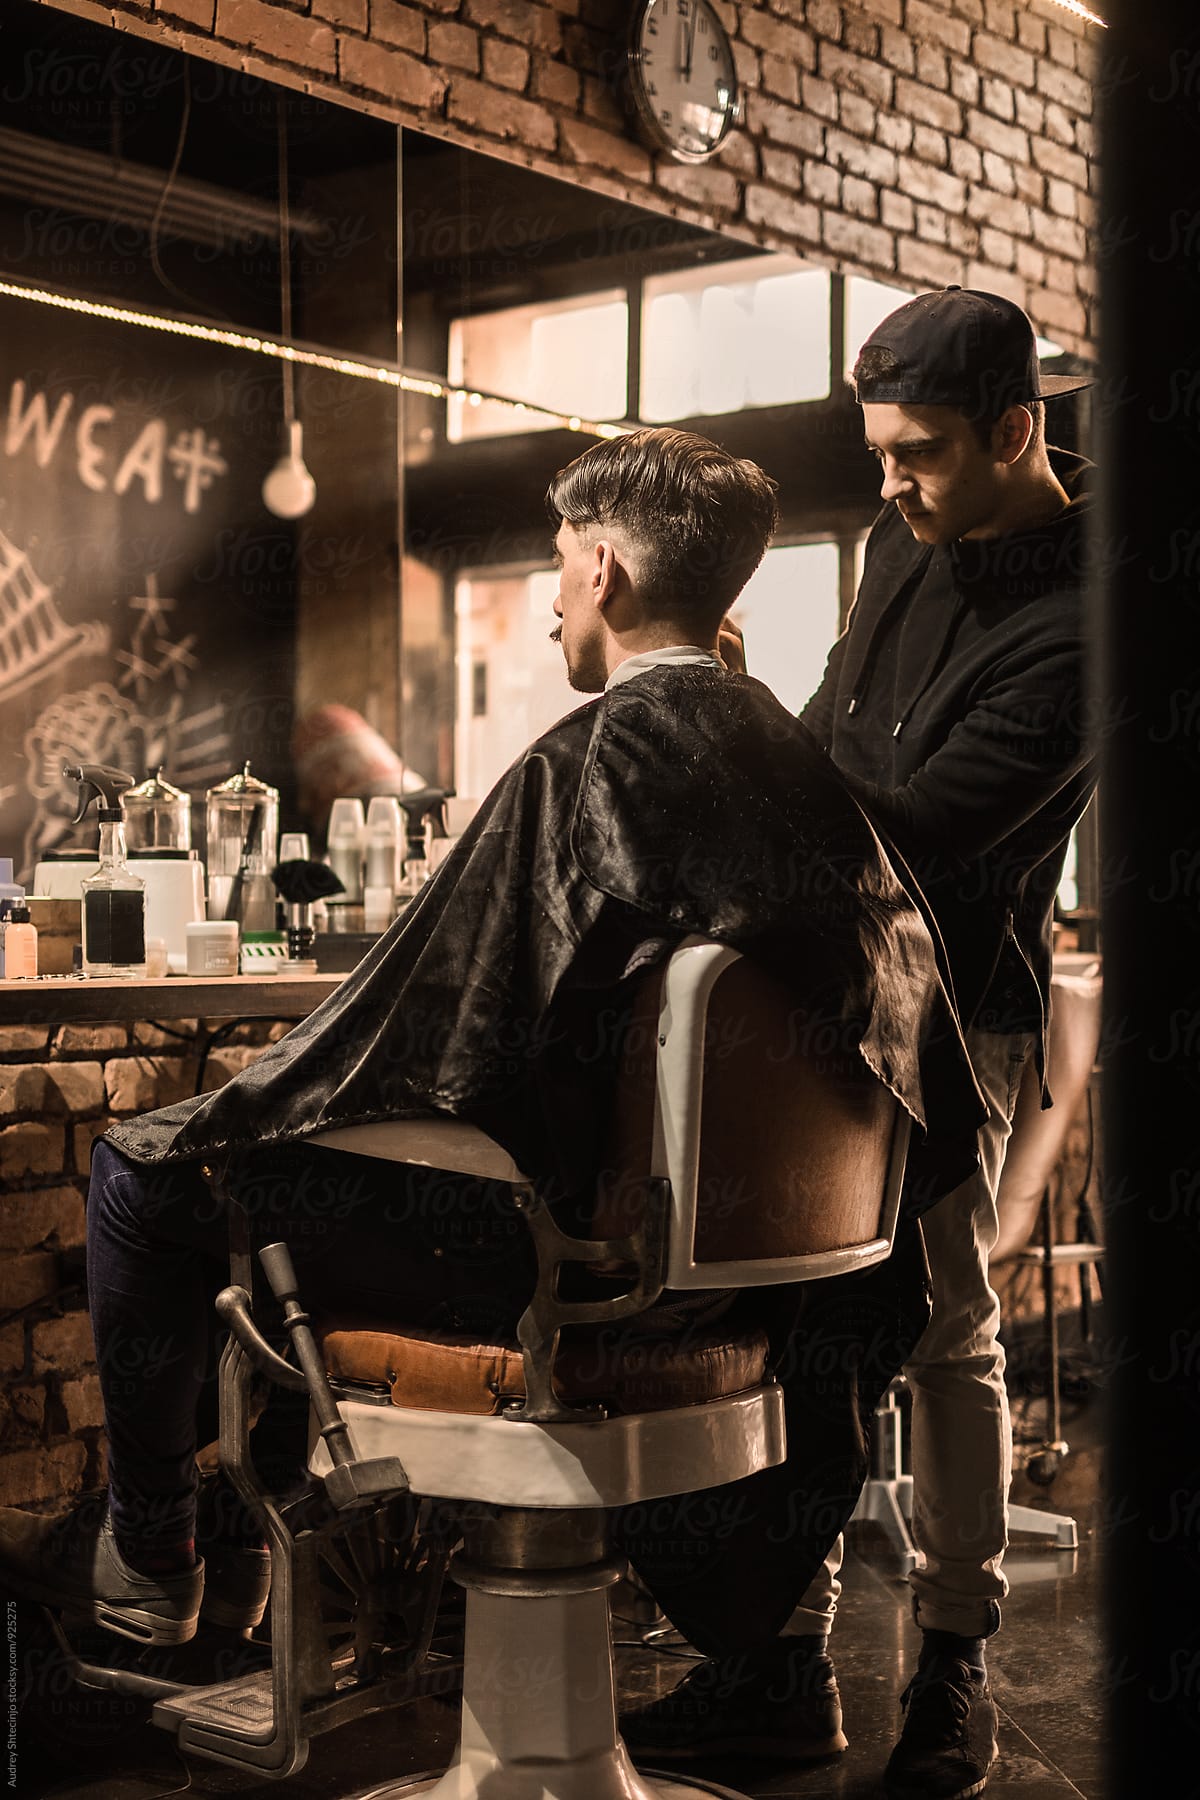 Young barber giving client a classic haircut in vintage barber shop